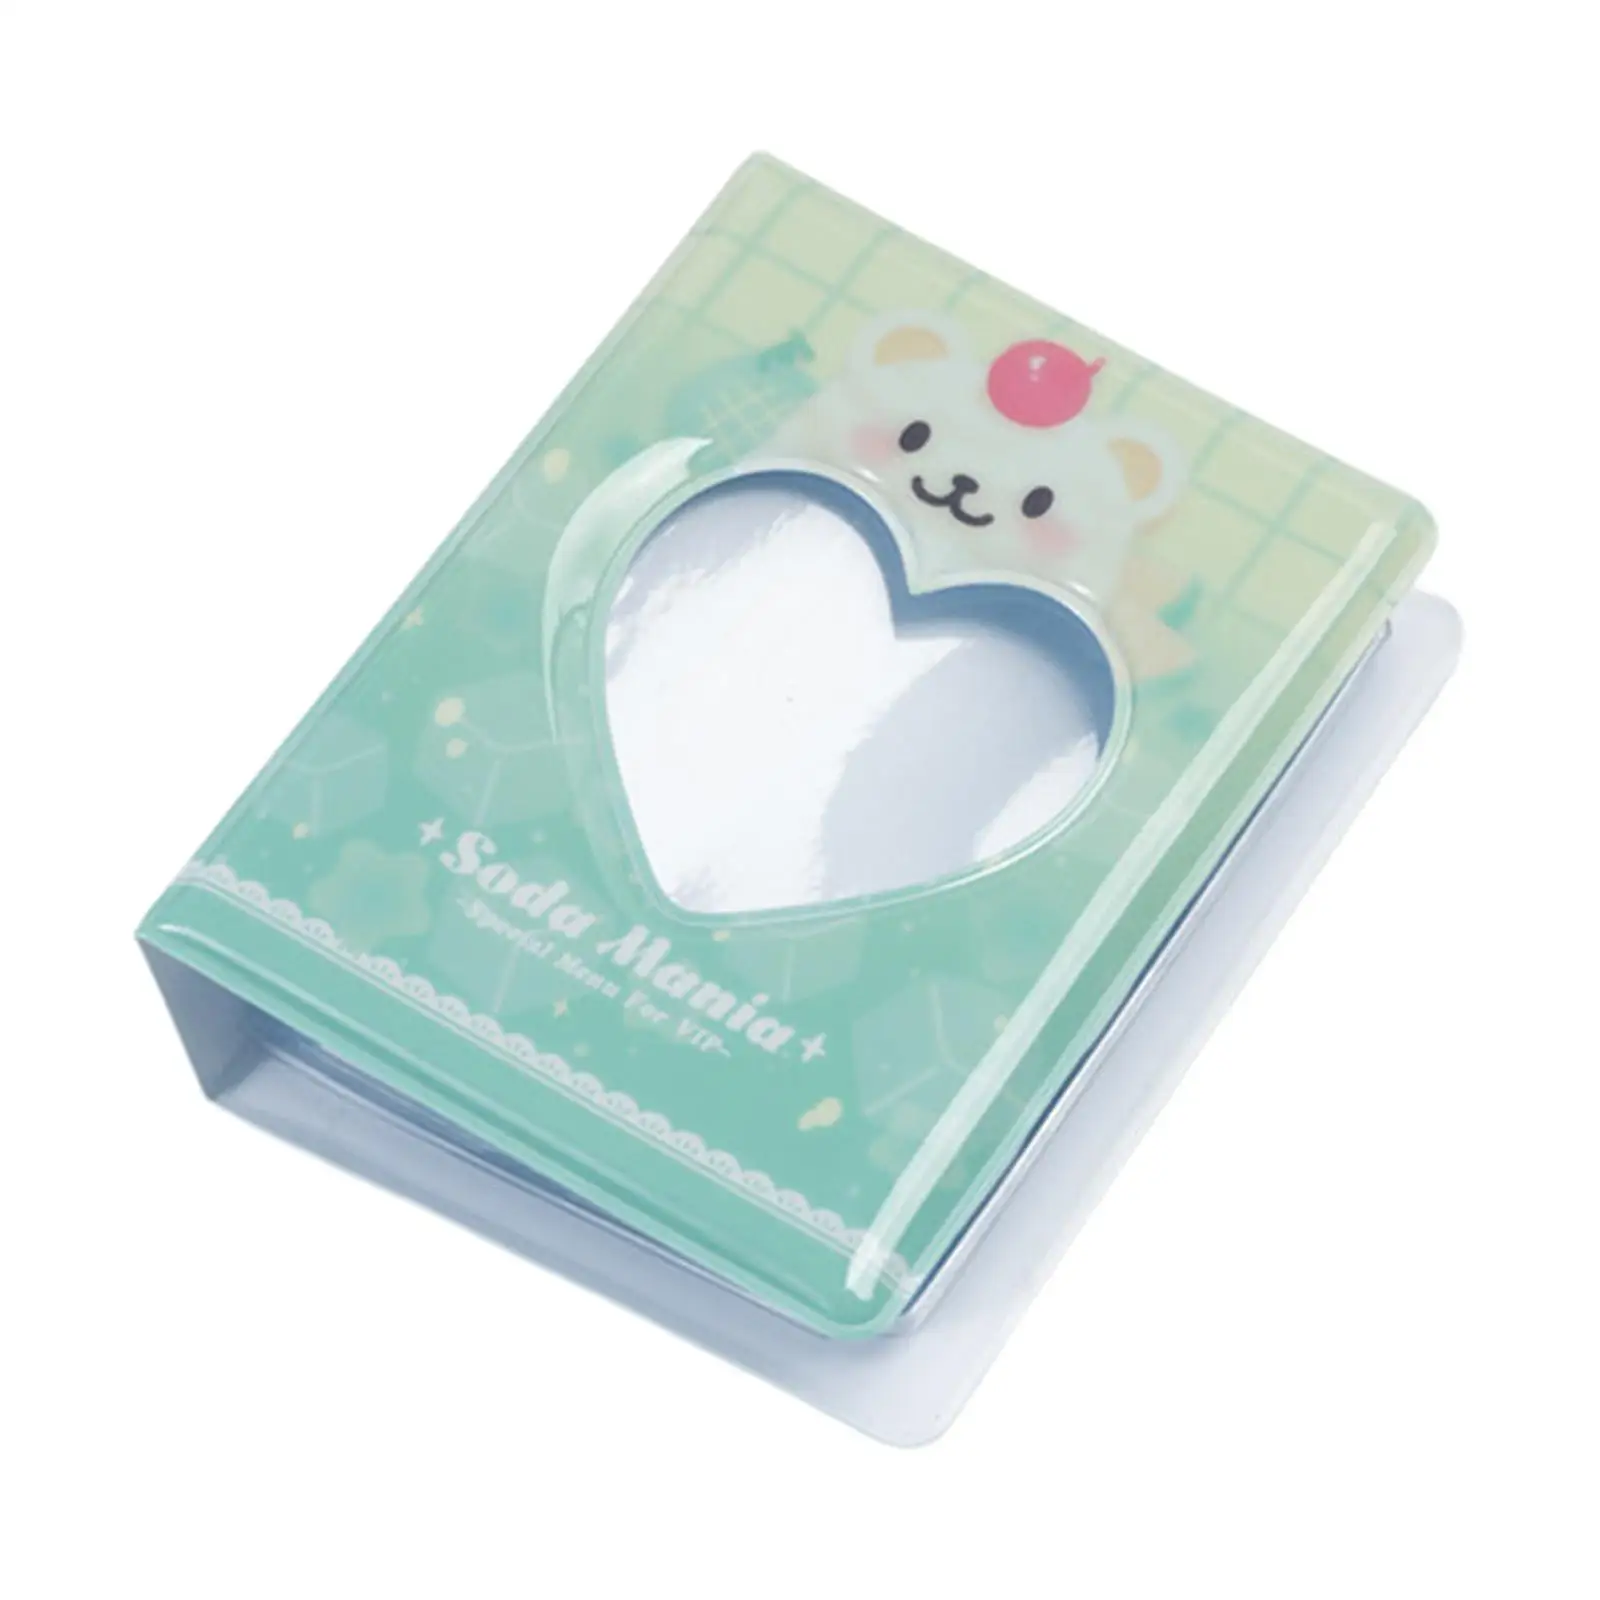 3 inch Photocard Holder Book Mini Picture Album for Business Card Girlfriend